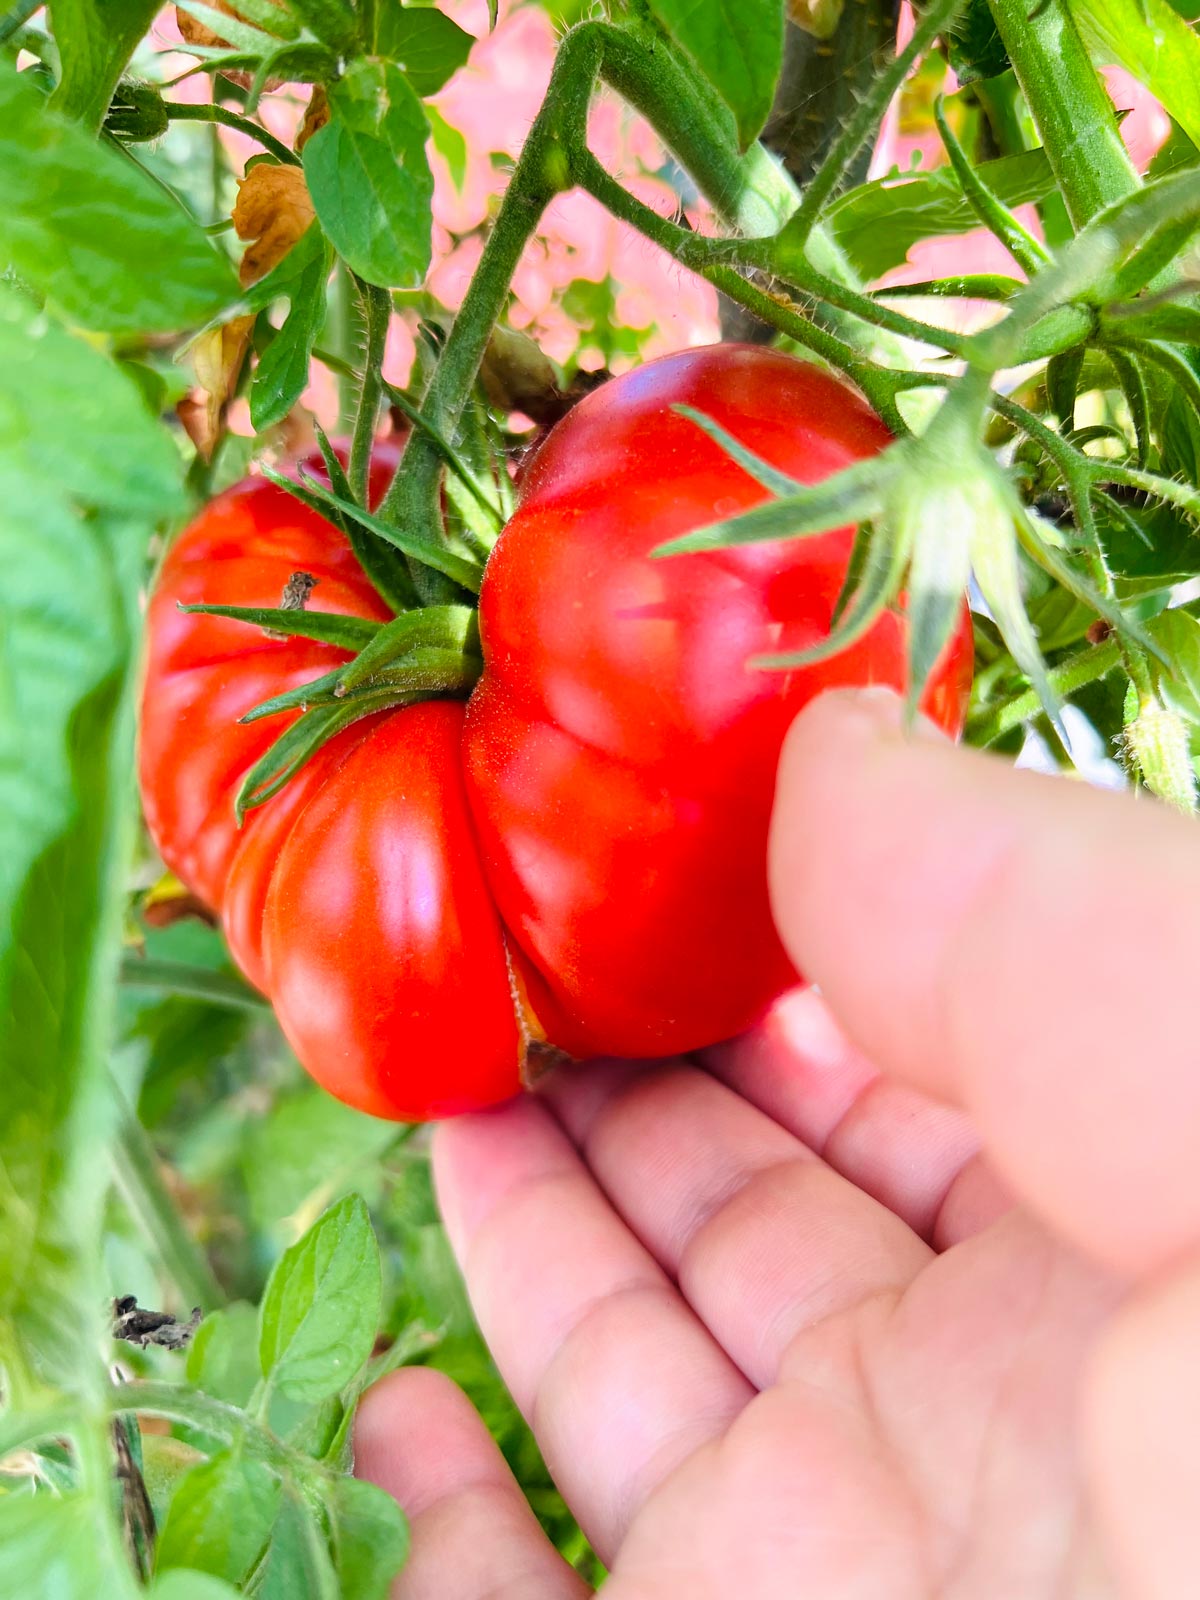 Tomato being harvested.